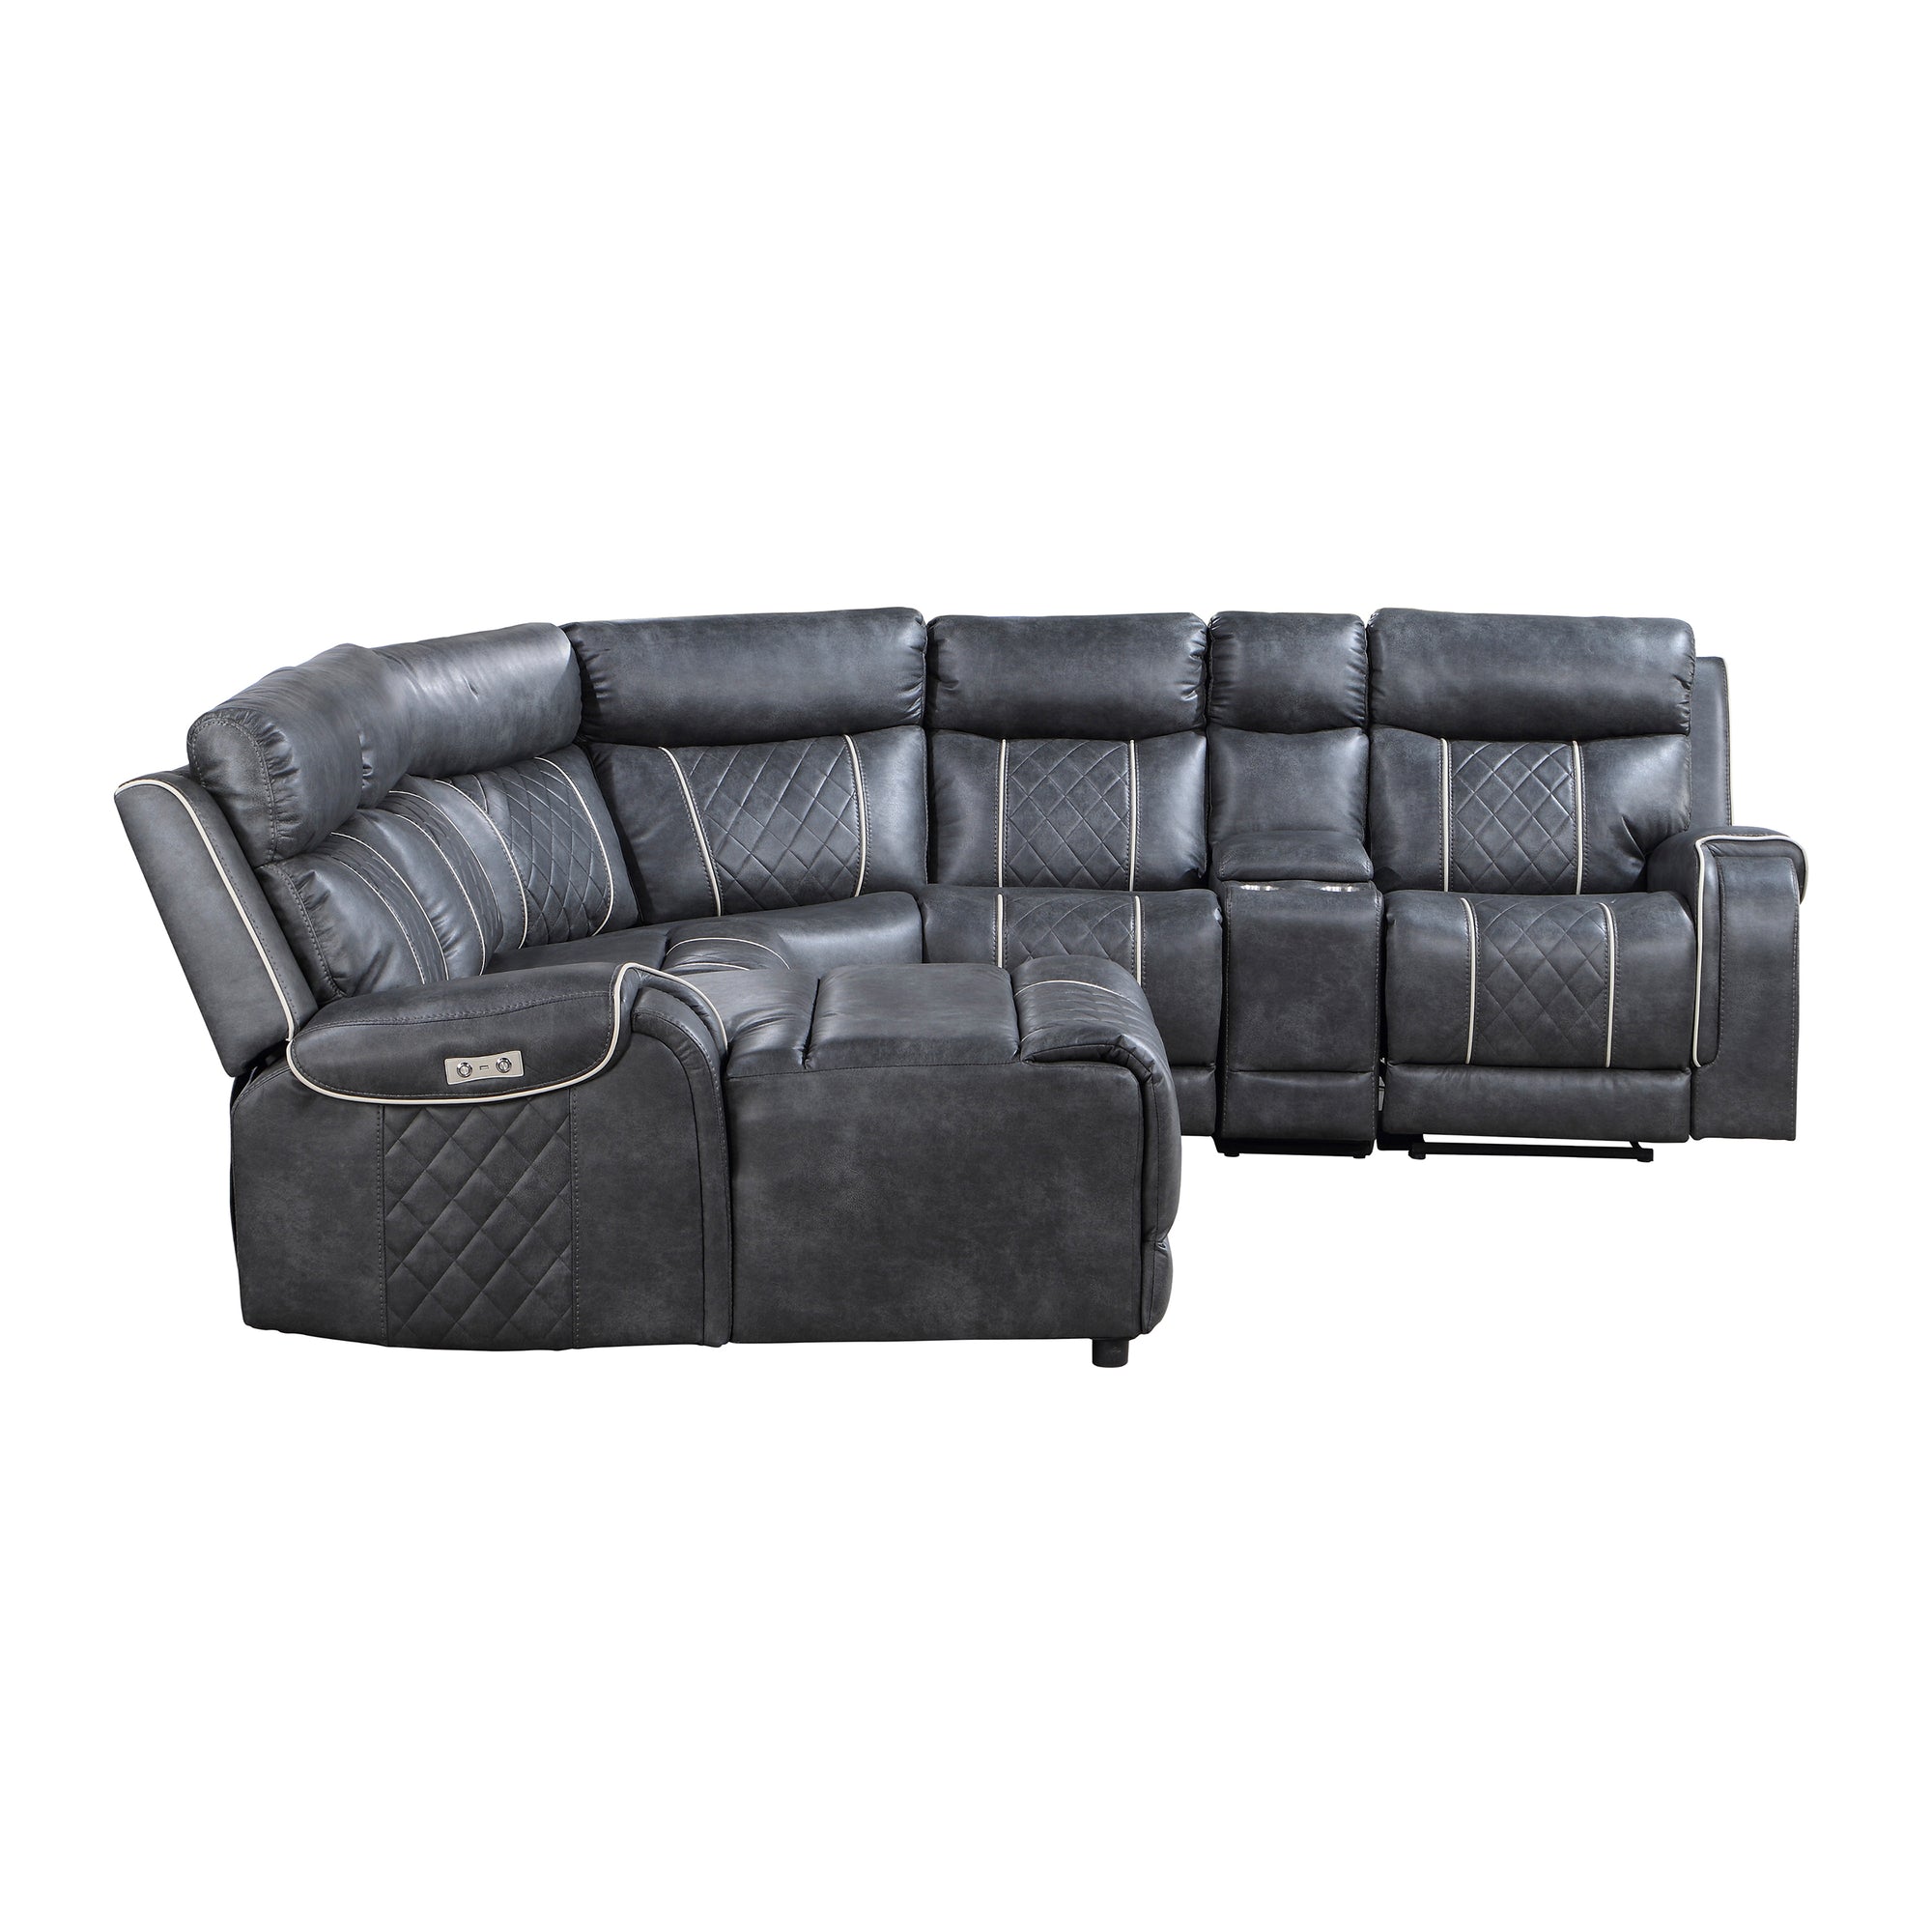 Percival Faux Leather Power Modular Reclining Sectional Sofa with Left Chaise